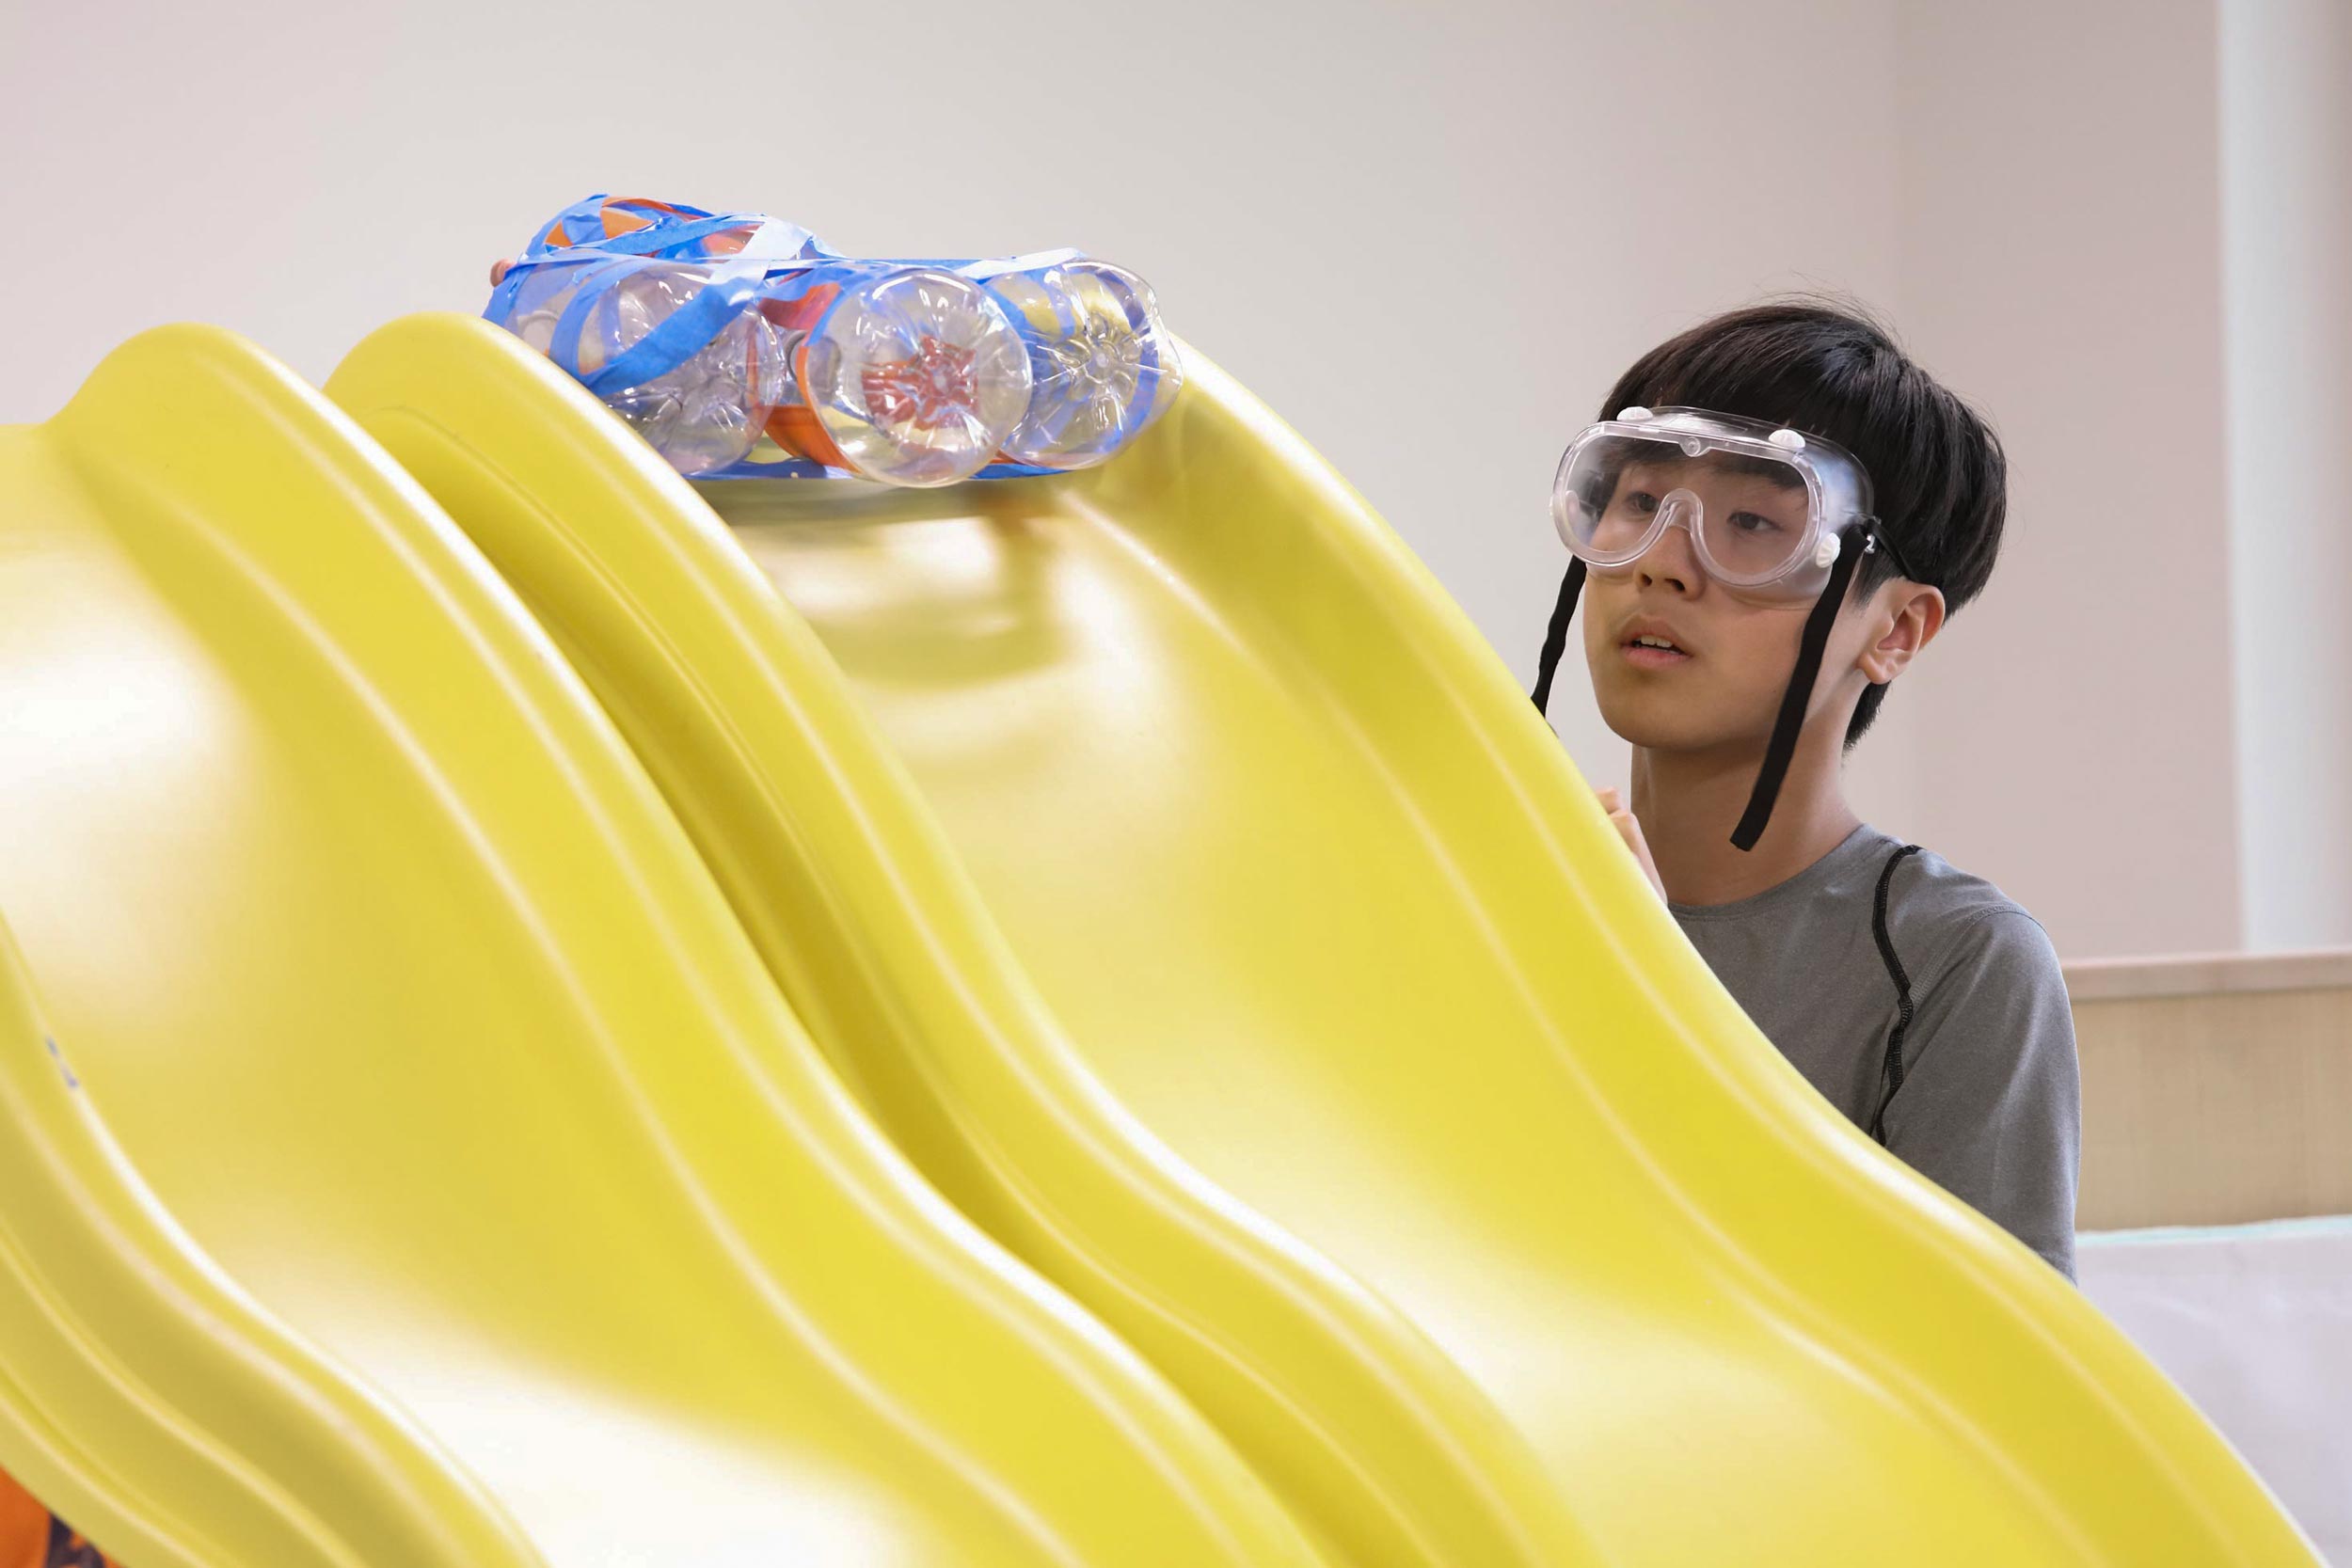 An engineer student through his safety goggles at his team’s vehicle at the top of a yellow plastic slide